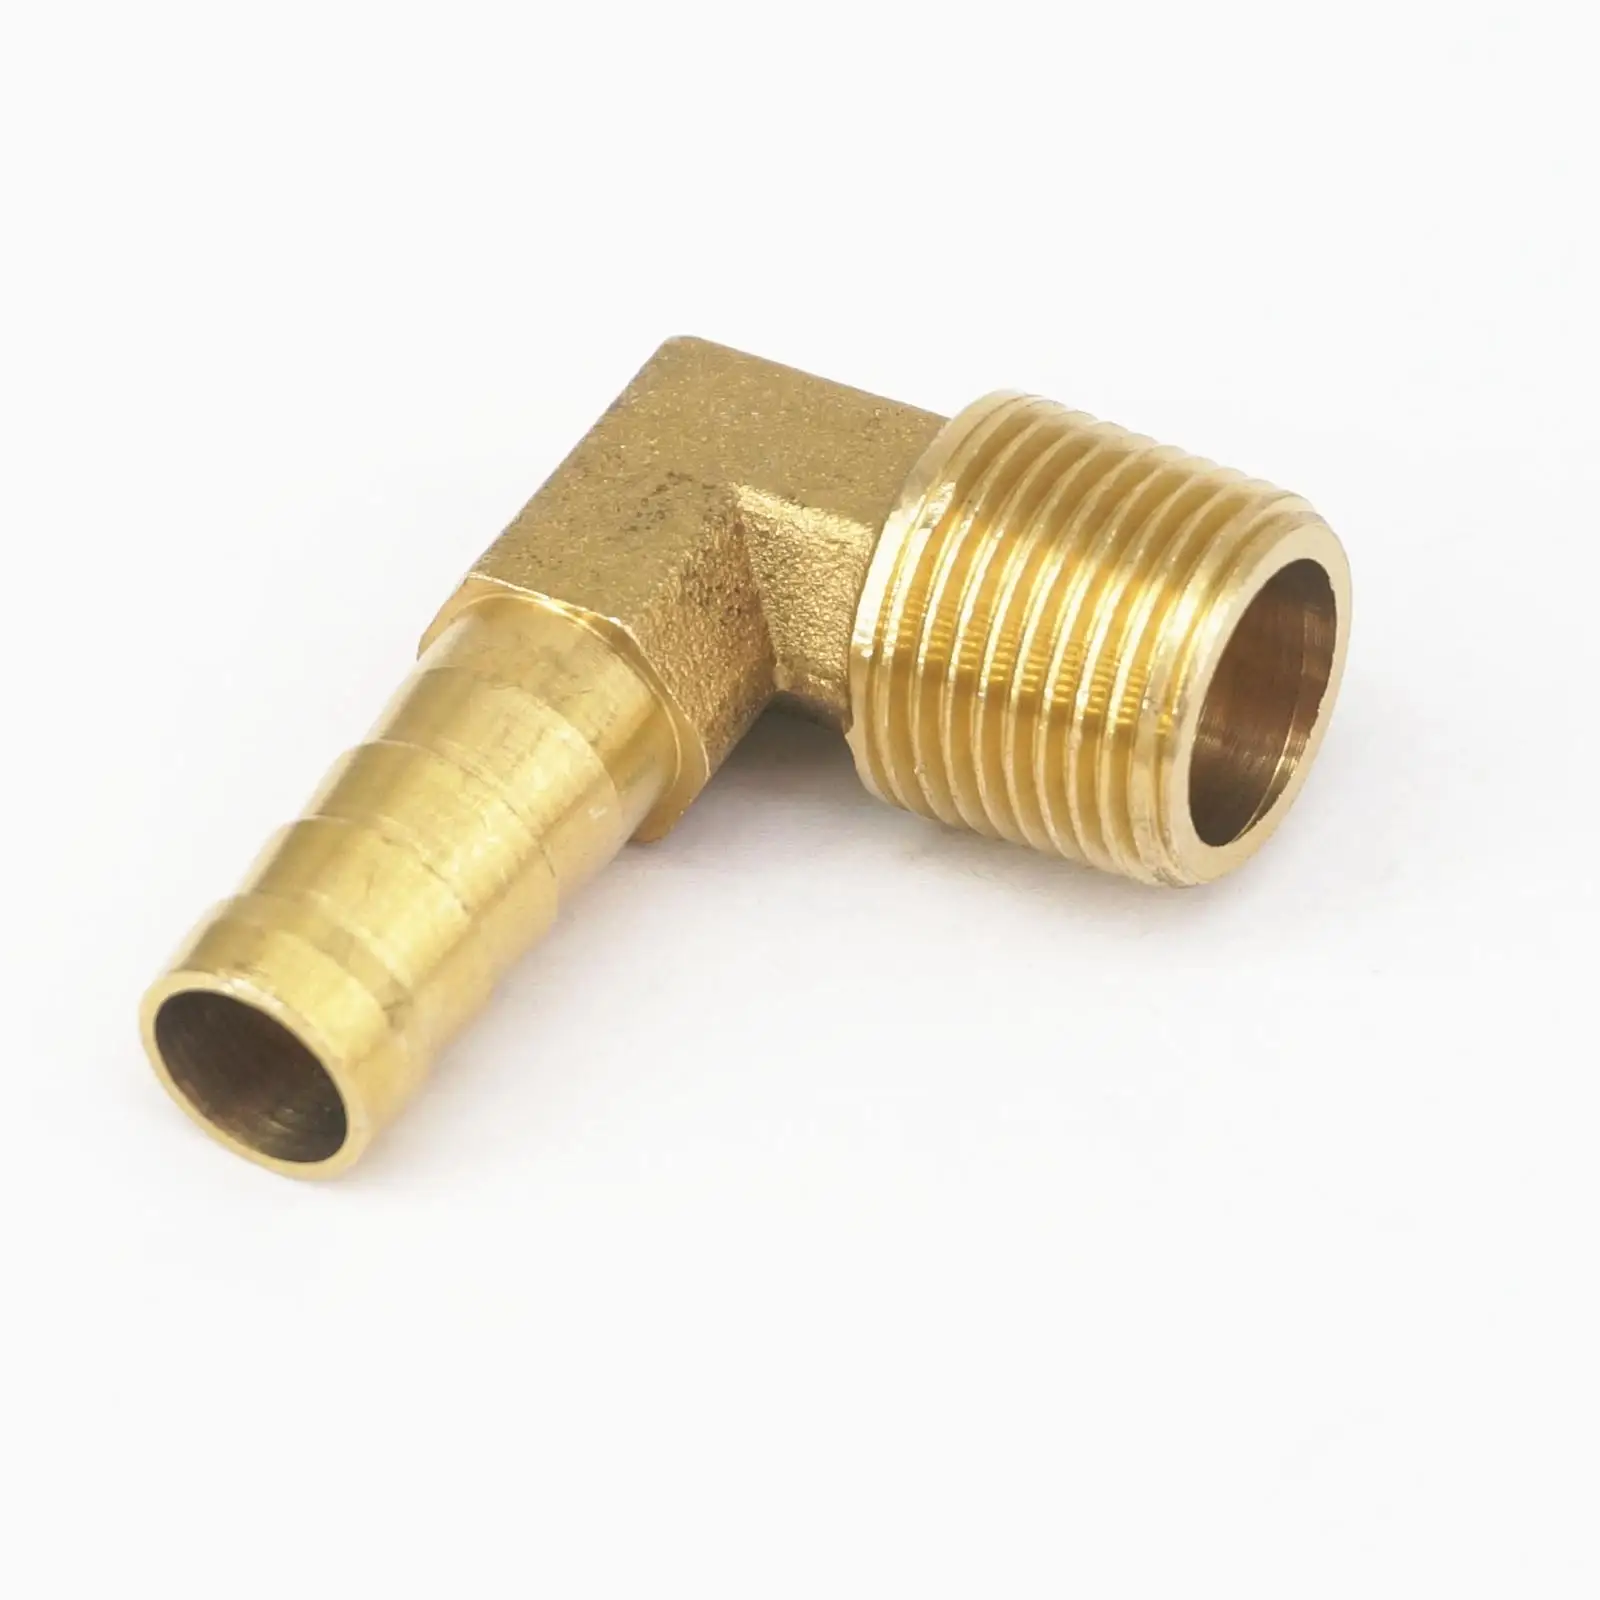 LOT 2 Hose Barb I/D 10mm x 1/2" BSP Male Thread Elbow Brass coupler Splicer Connector fitting for Fuel Gas Water